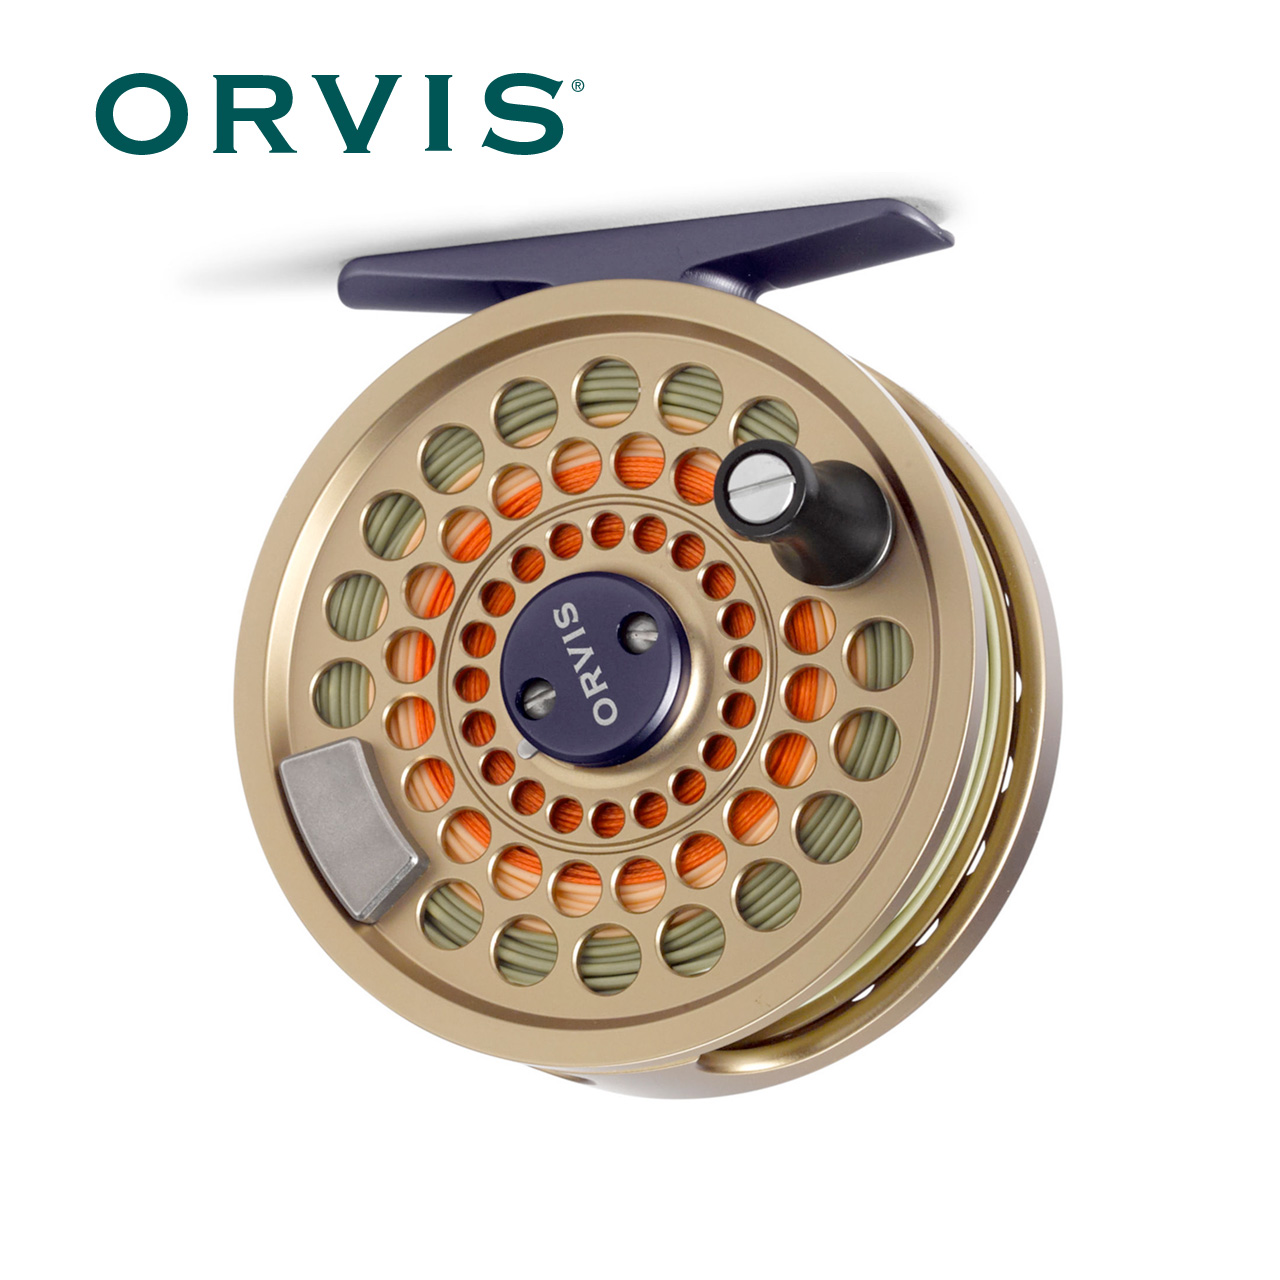 Orvis Battenkill iv for Saltwater use - Page 2 - Fly Fishing